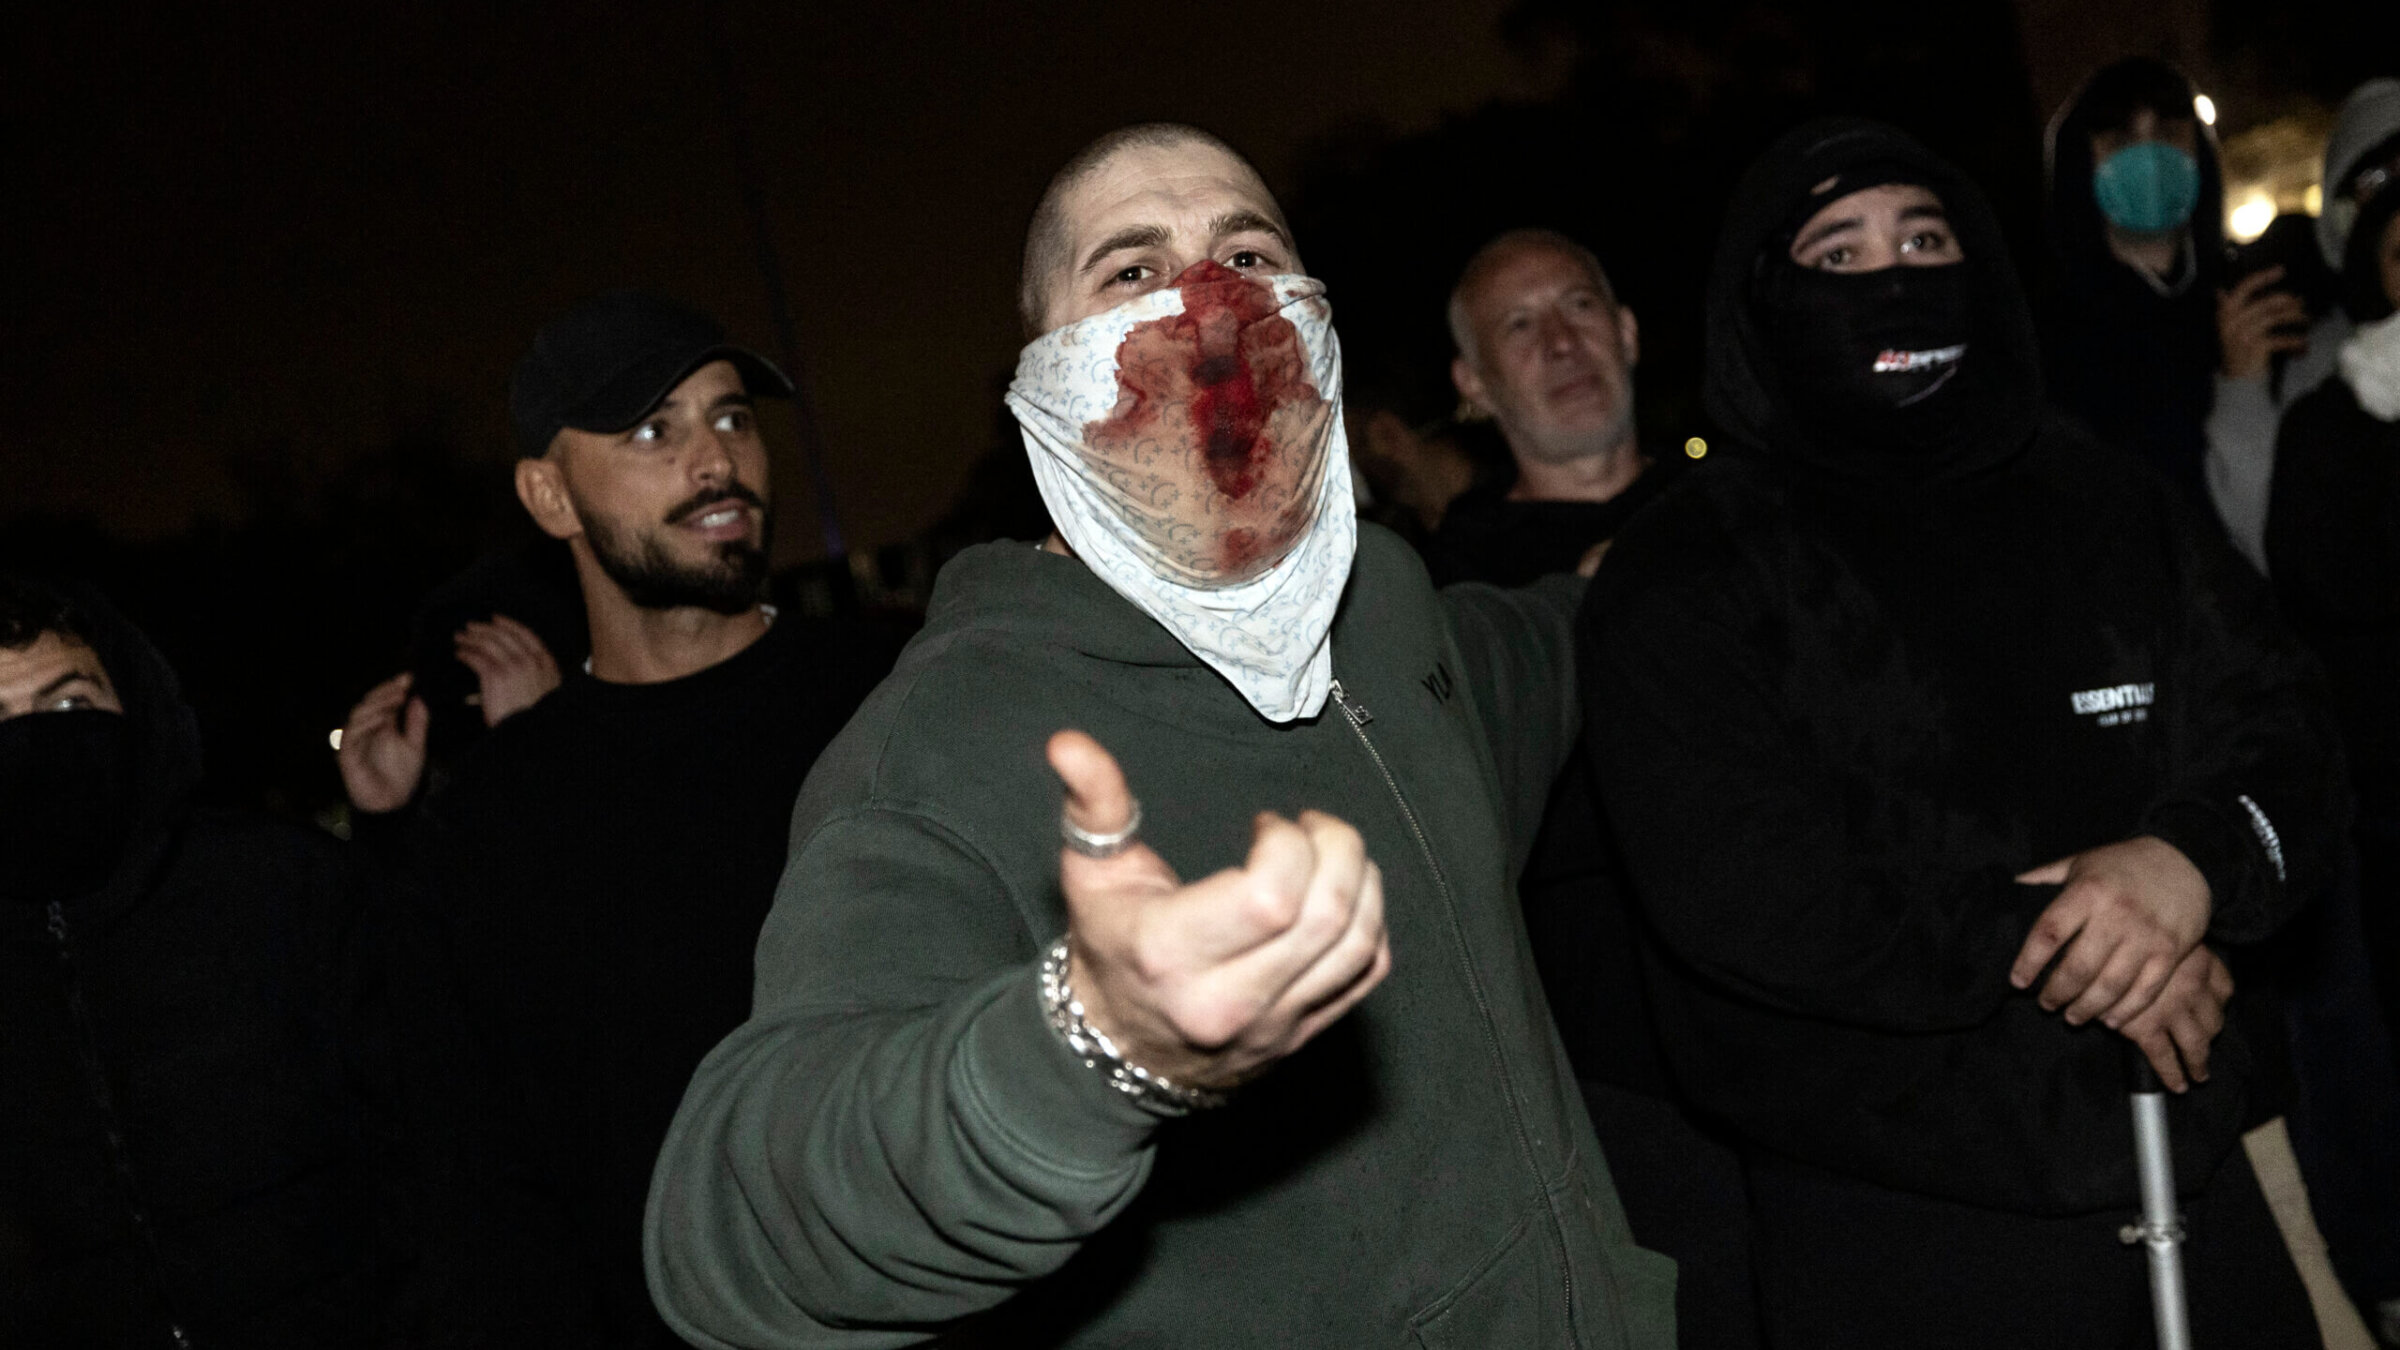 A counter protester shouts at pro-Palestinian protesters at a pro-Palestinian encampment set up on the campus of the University of California, Los Angeles on May 1.